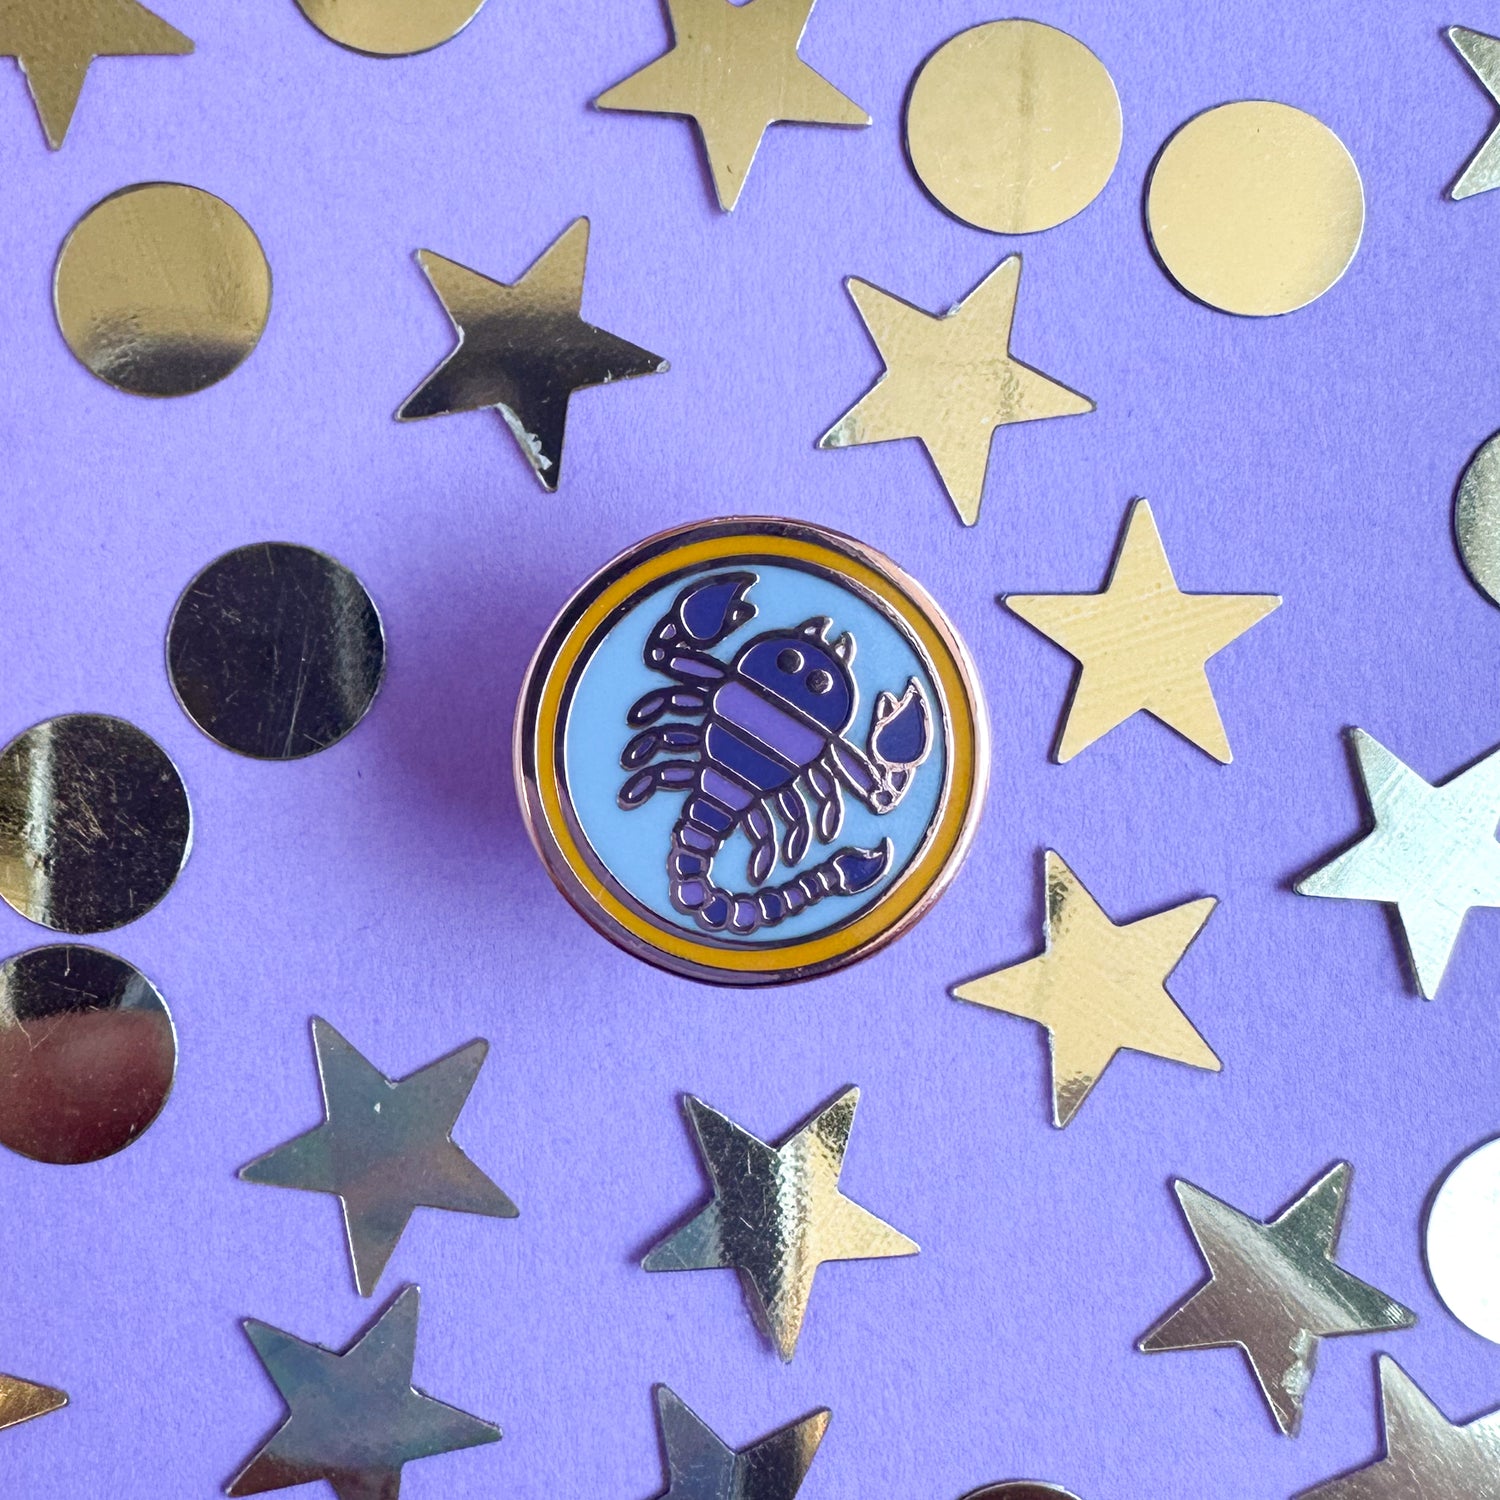 A circular enamel pin with a purple scorpion on it to represent the Scorpio zodiac sign. The pin is on a purple background with gold stars and circles around the pin. 